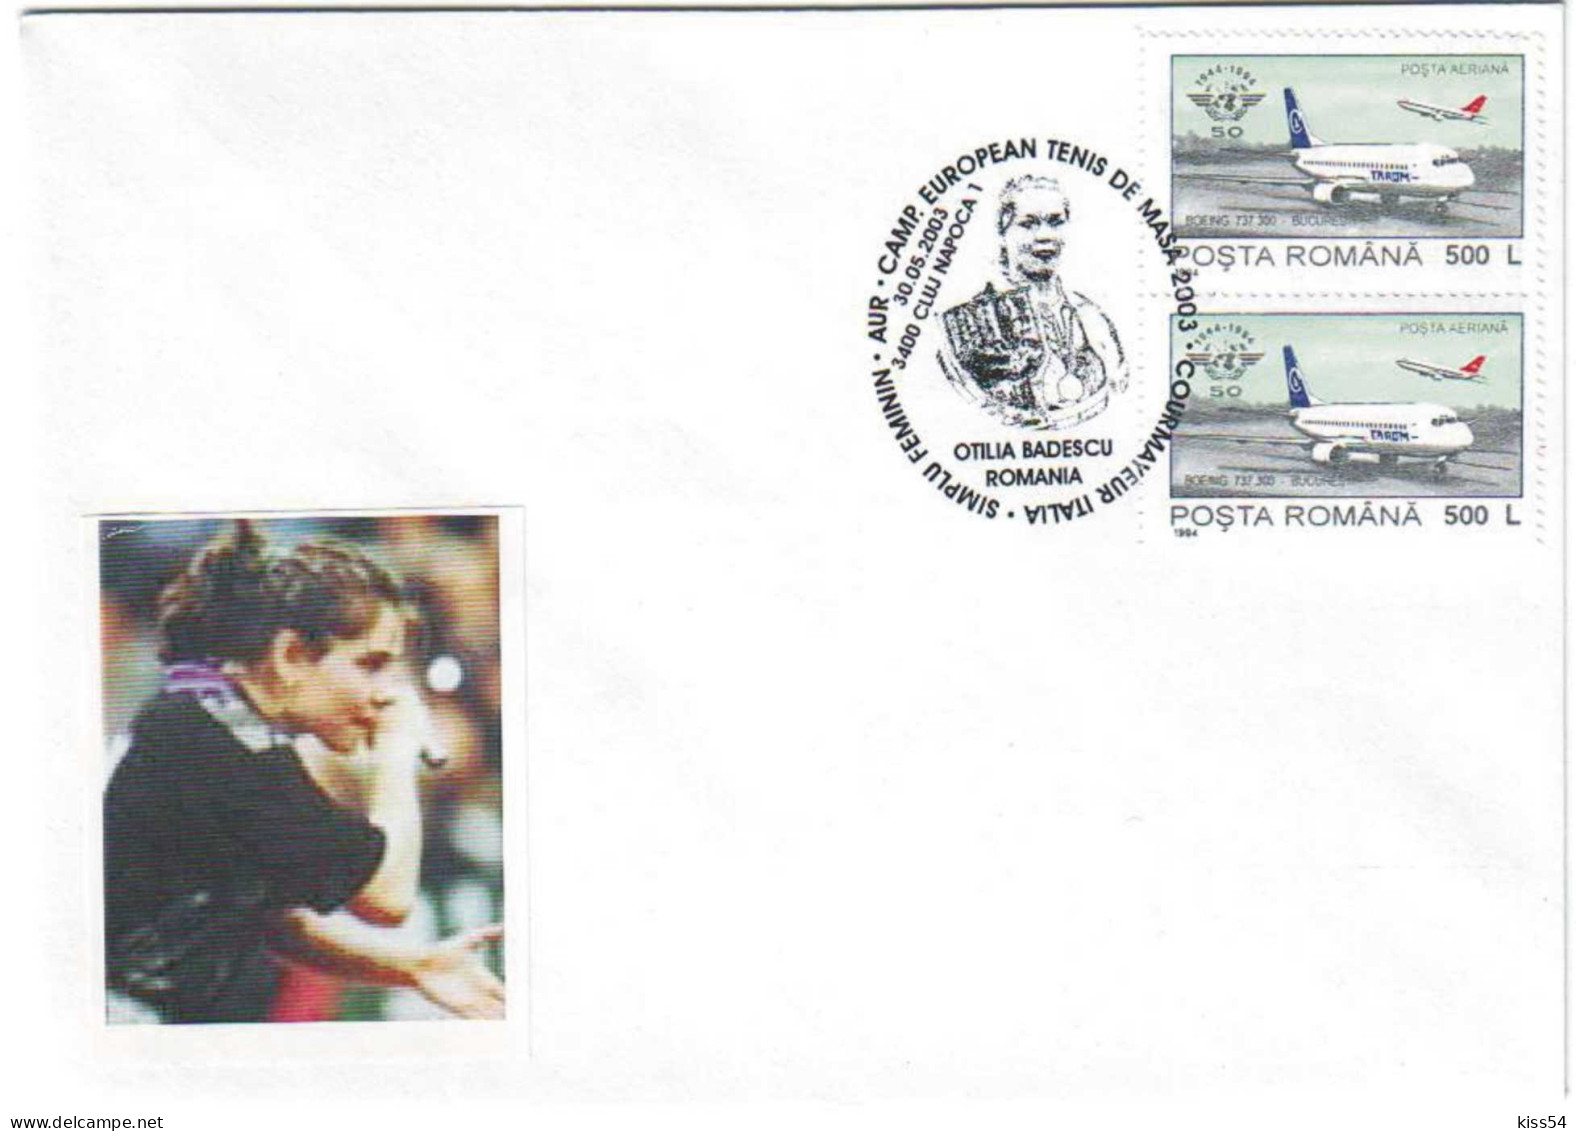 COV 95 - 272 European Women's Table Tennis Championship ITALY, Romania - Cover - Used - 2003 - Covers & Documents